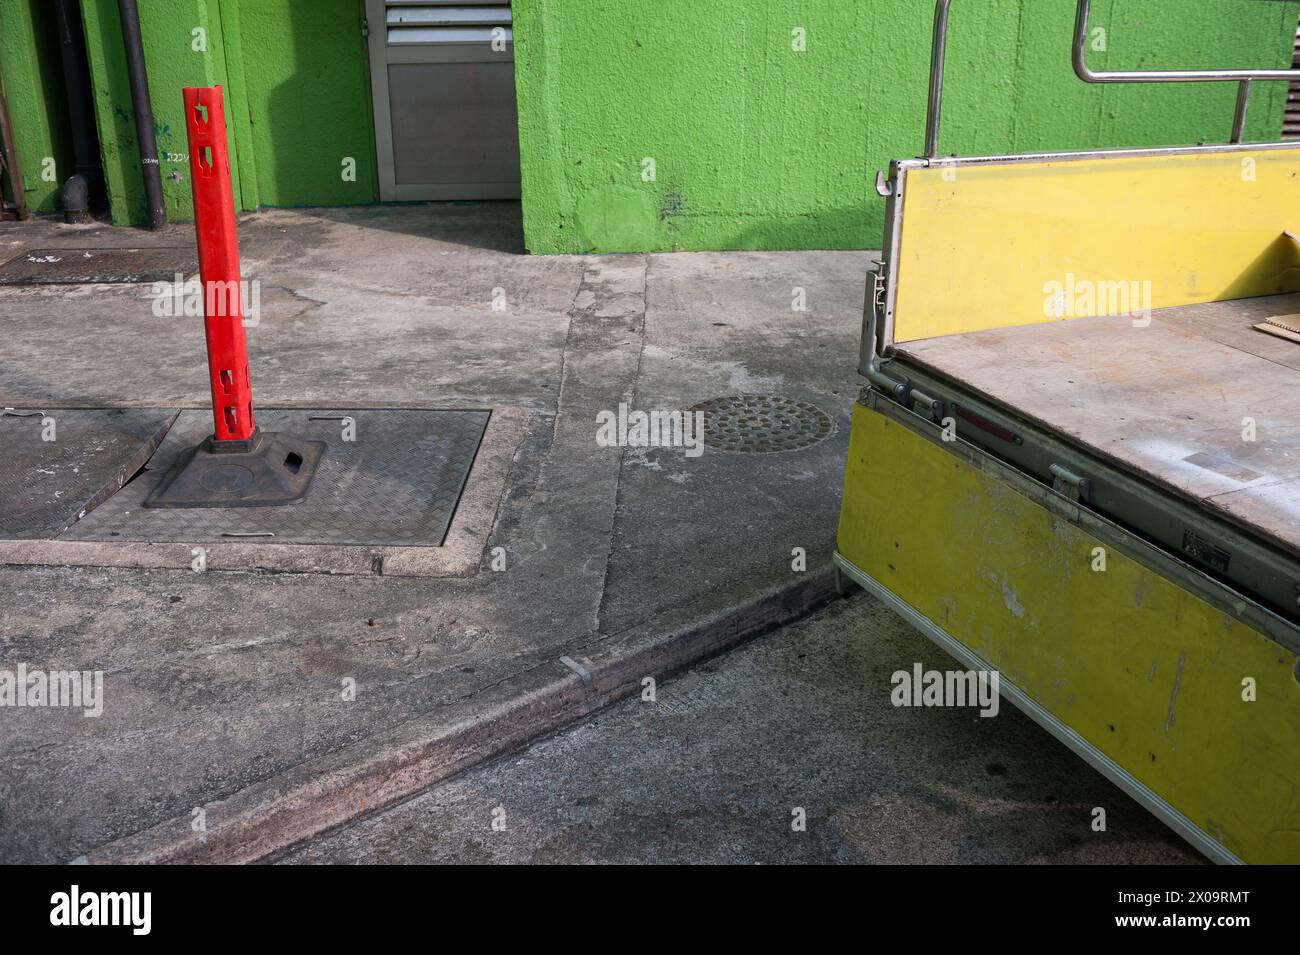 20.10.2017, Singapore, Republic of Singapore, Asia - Abstract street scene with yellow cargo bed of a lorry parked next to a green painted outer wall. Stock Photo